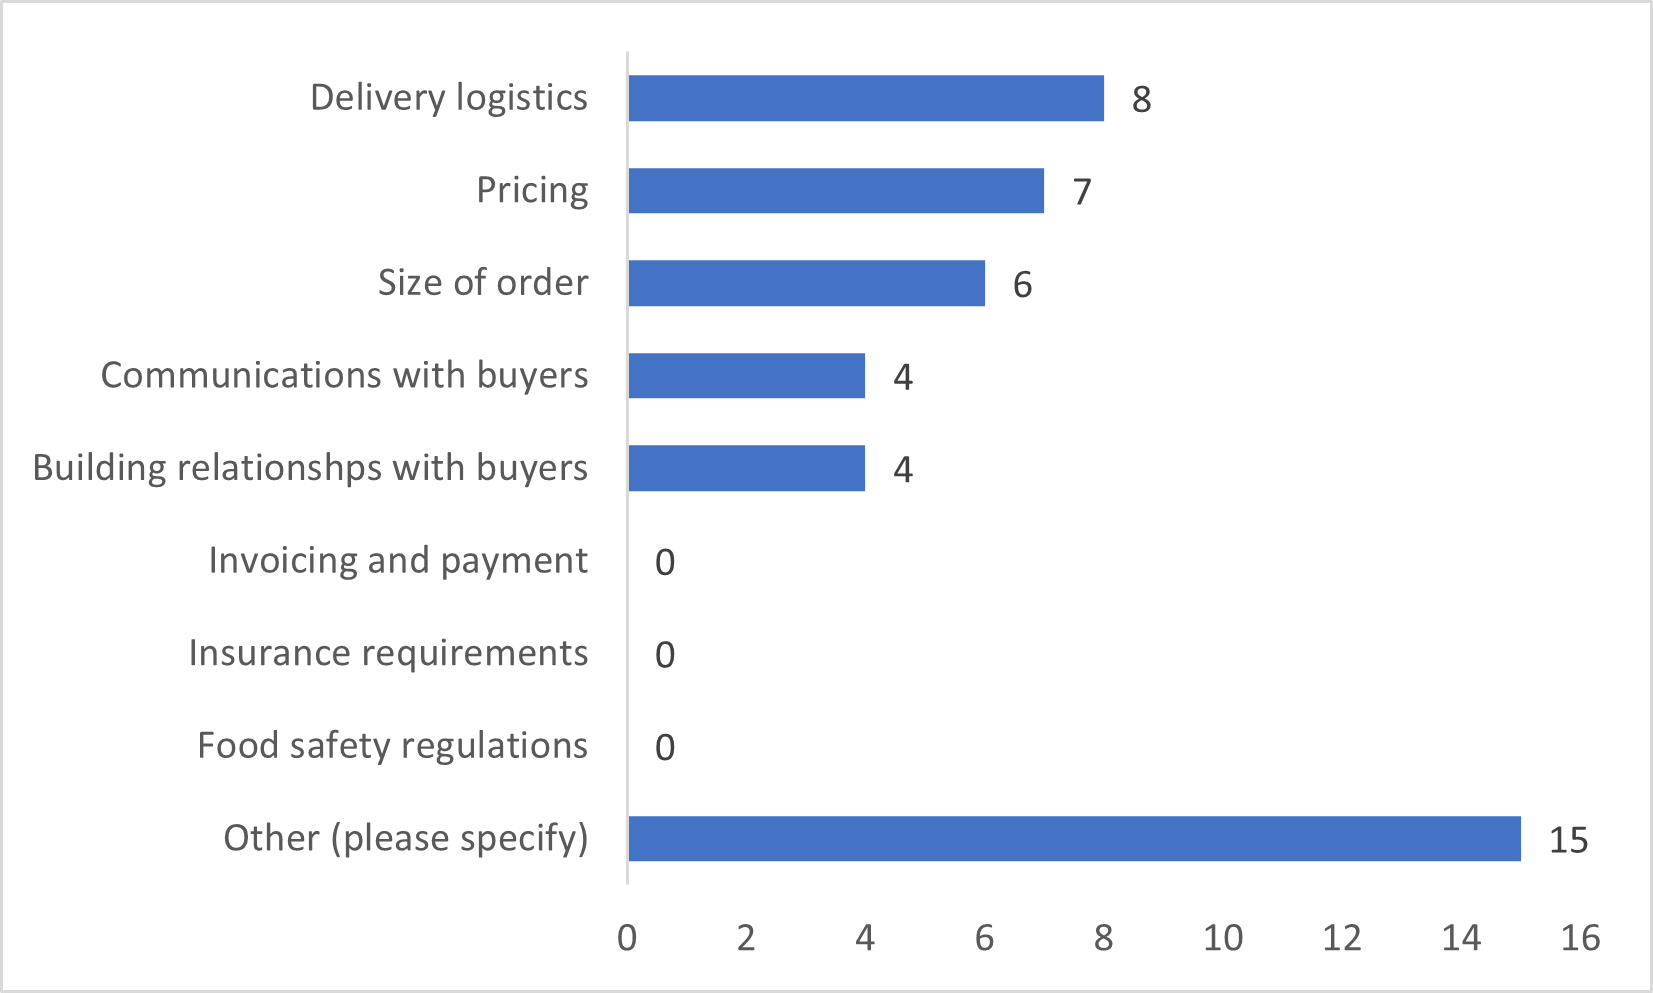 Bar chart showing reported difficulties: Delivery logistics (8), Pricing (7), Size of order (6), Communications with buyers (4), Building relationships with buyers (4), Invoicing and payment (0), Insurance requirements (0), Food safety regulations (0), Other (please specifiy) (15)